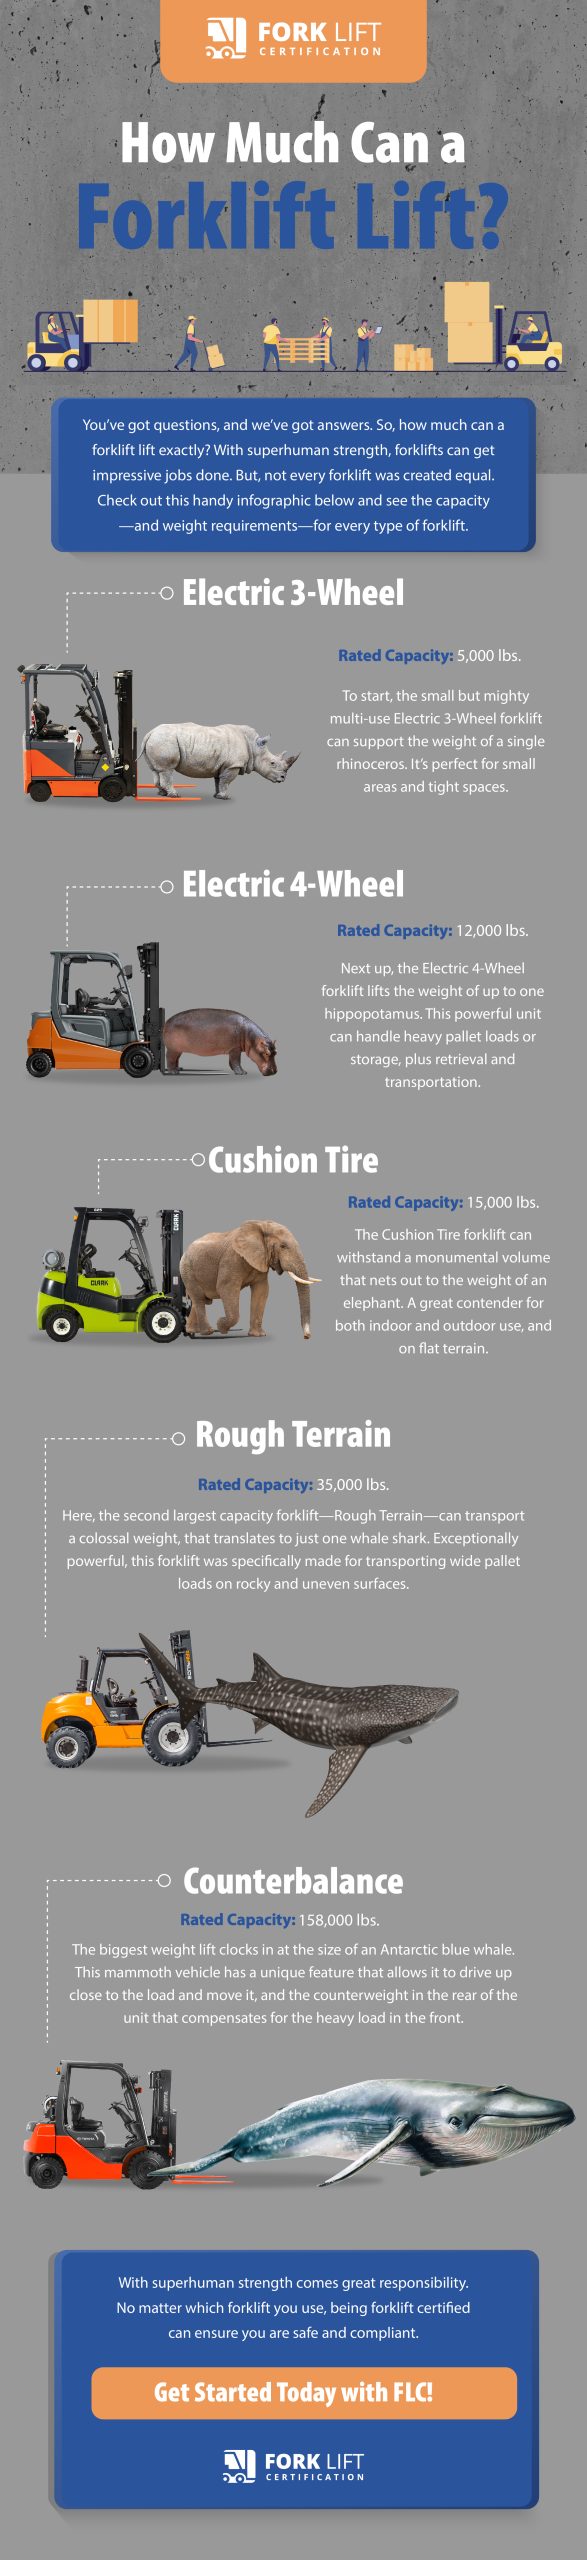 How Much Can a Forklift Lift Infographic